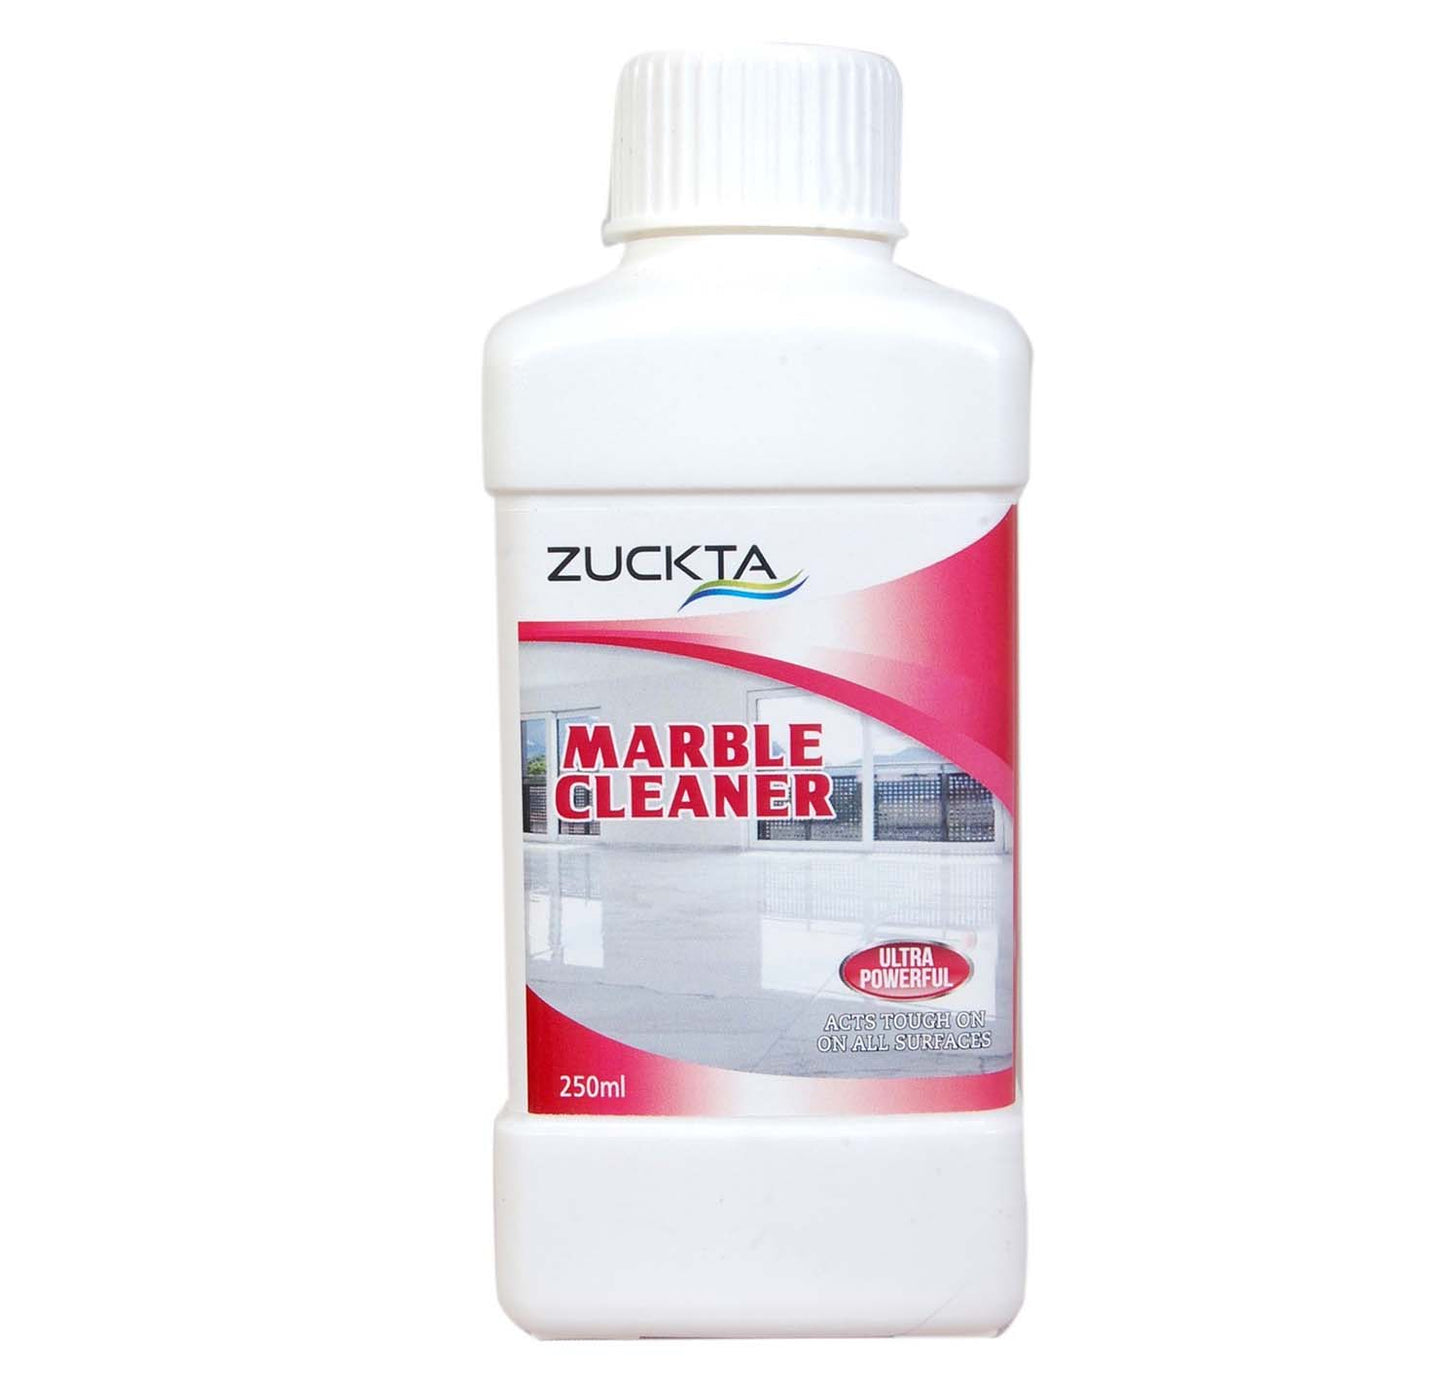 Zuckta Marble Cleaner Ultra Powerful - Acts Tough On All Surfaces